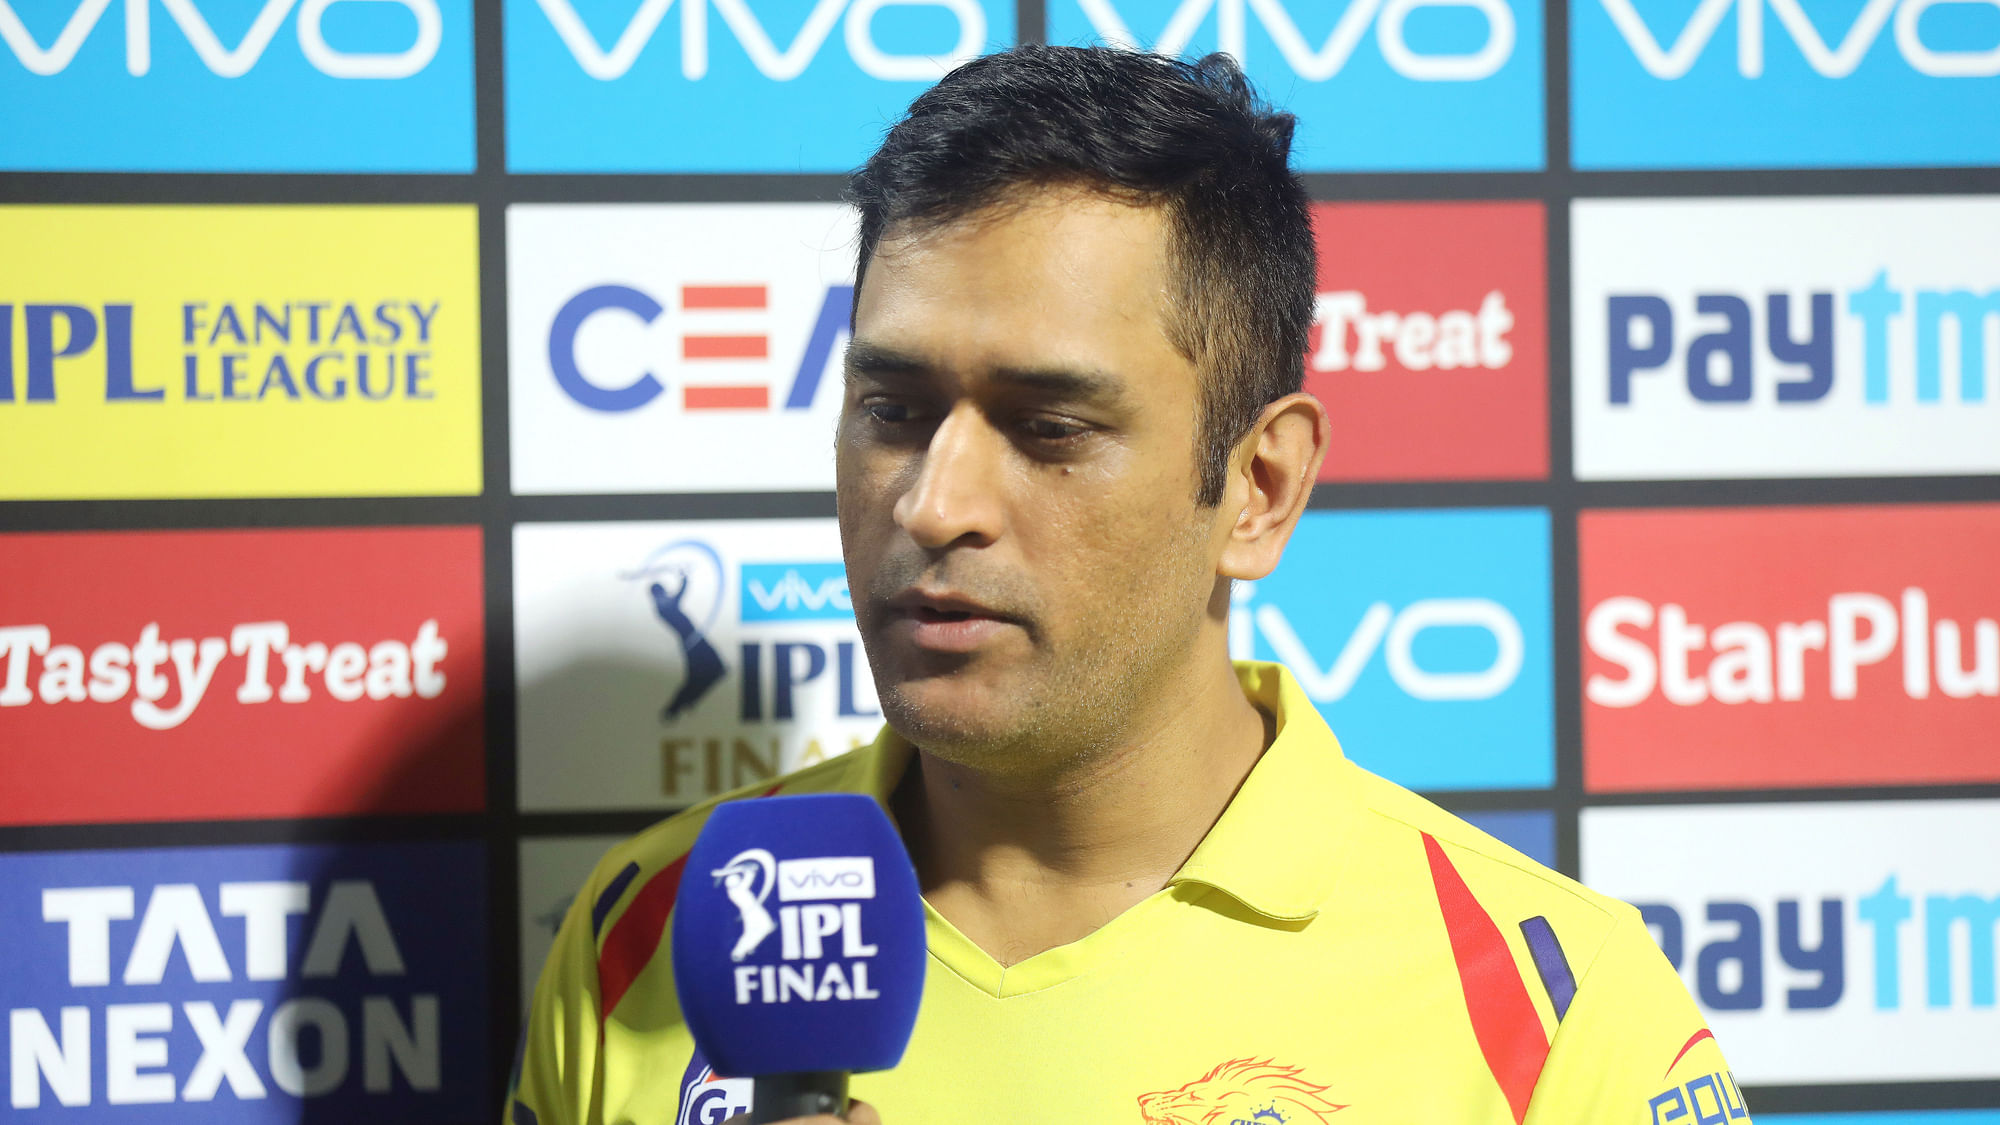 MS Dhoni captained Chennai Super Kings to their third IPL win.&nbsp;